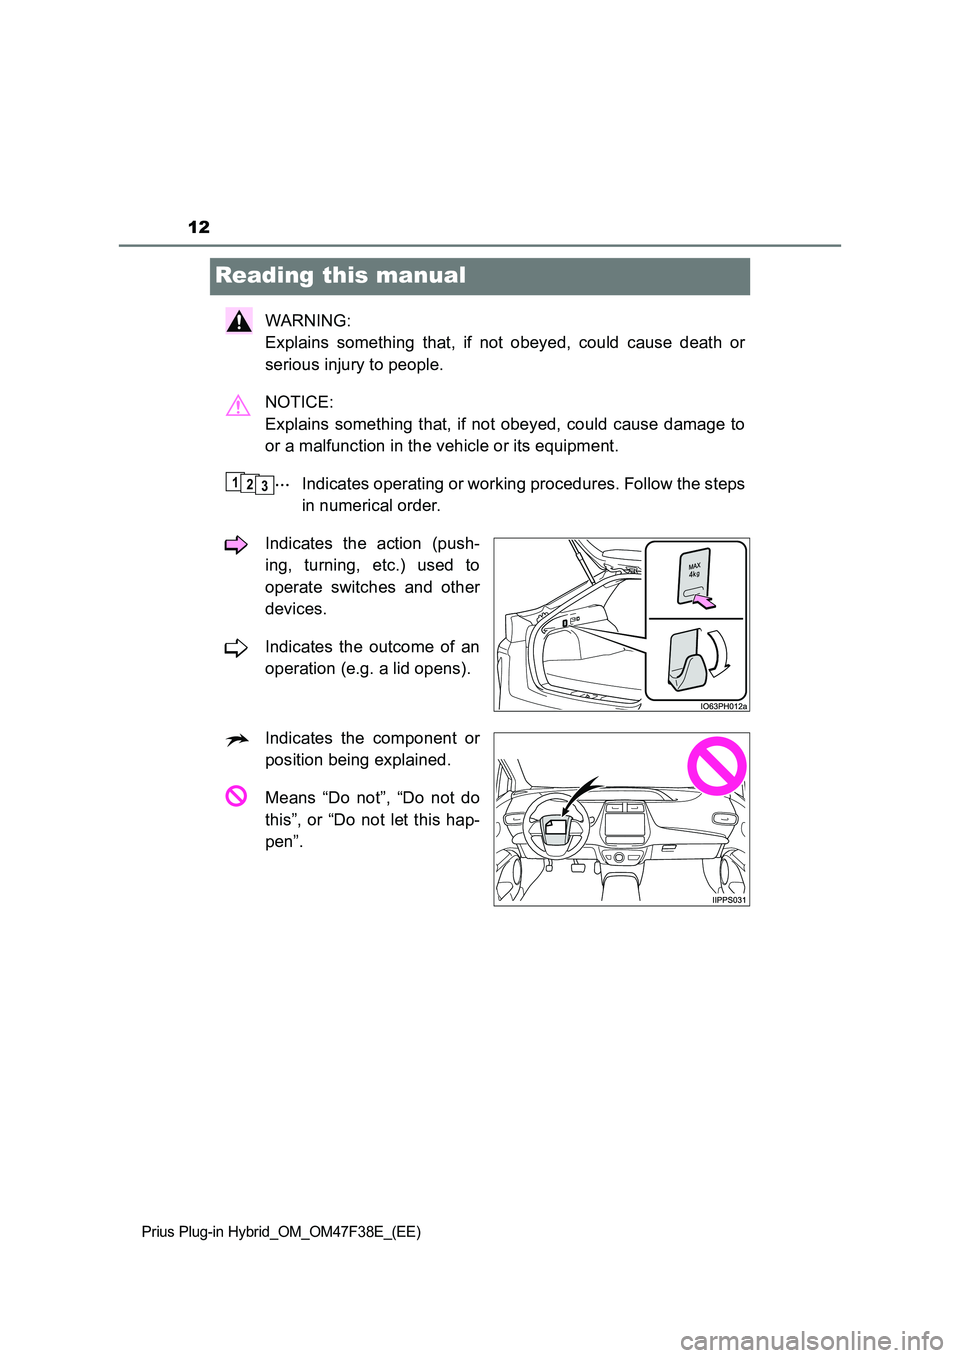 TOYOTA PRIUS PLUG-IN HYBRID 2023  Owners Manual 12
Prius Plug-in Hybrid_OM_OM47F38E_(EE)
Reading this manual
WARNING:  
Explains something that, if not obeyed, could cause death or 
serious injury to people. 
NOTICE:  
Explains something that, if n